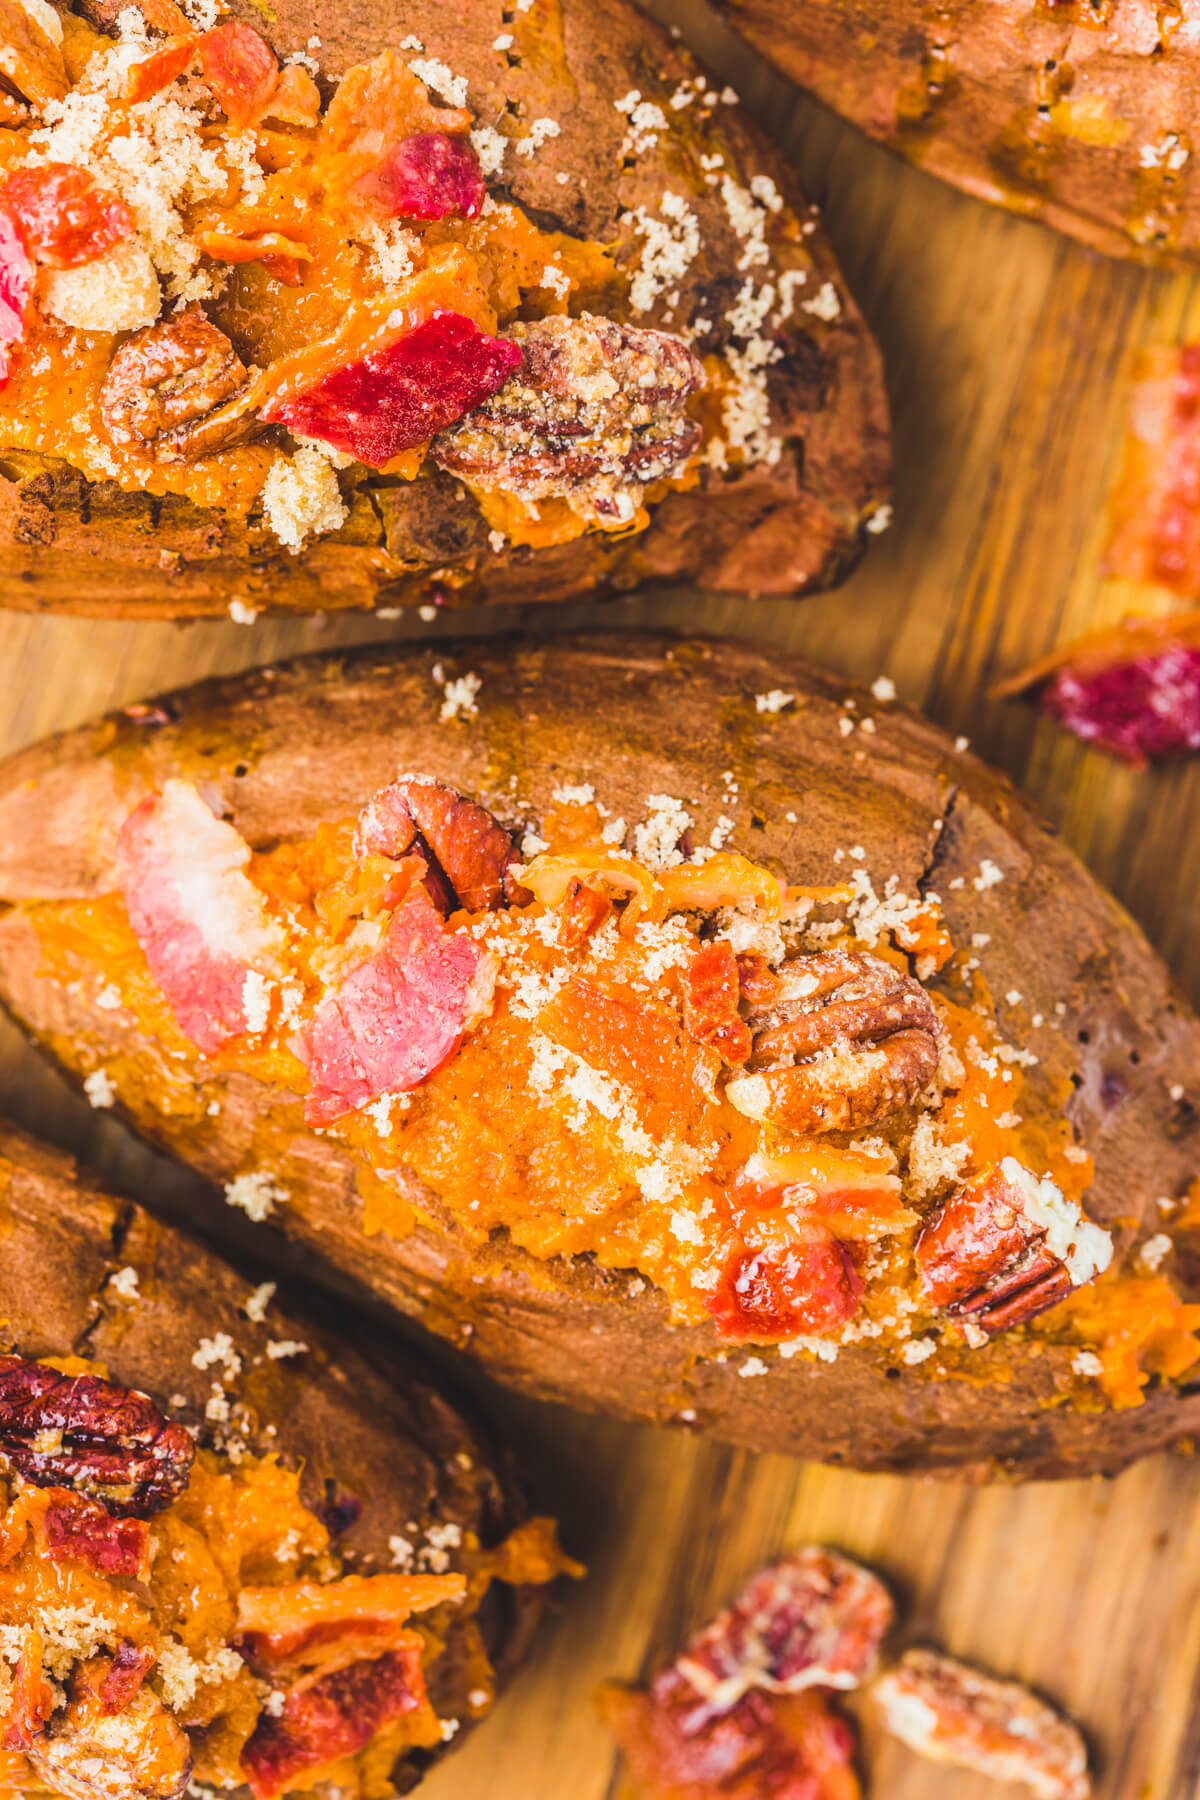 Three Twice Baked Sweet Potatoes topped with crispy bacon and pecans on a wooden serving board.